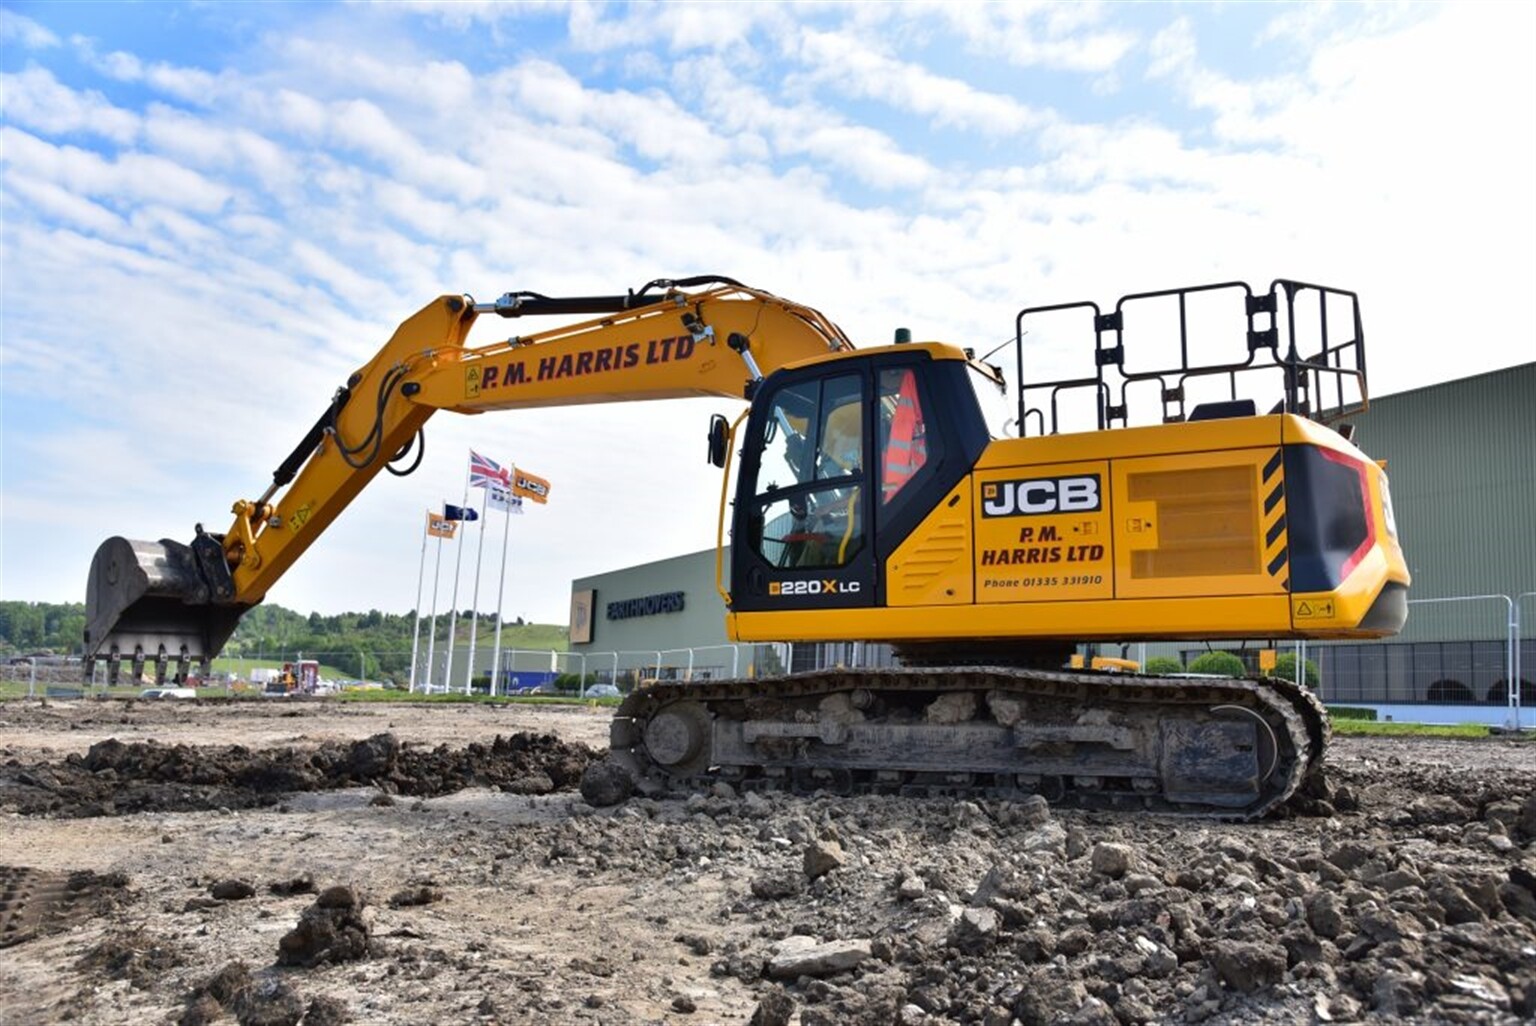 CUSTOMER HAILS NEW X SERIES AS THE BEST JCB HAS EVER MADE